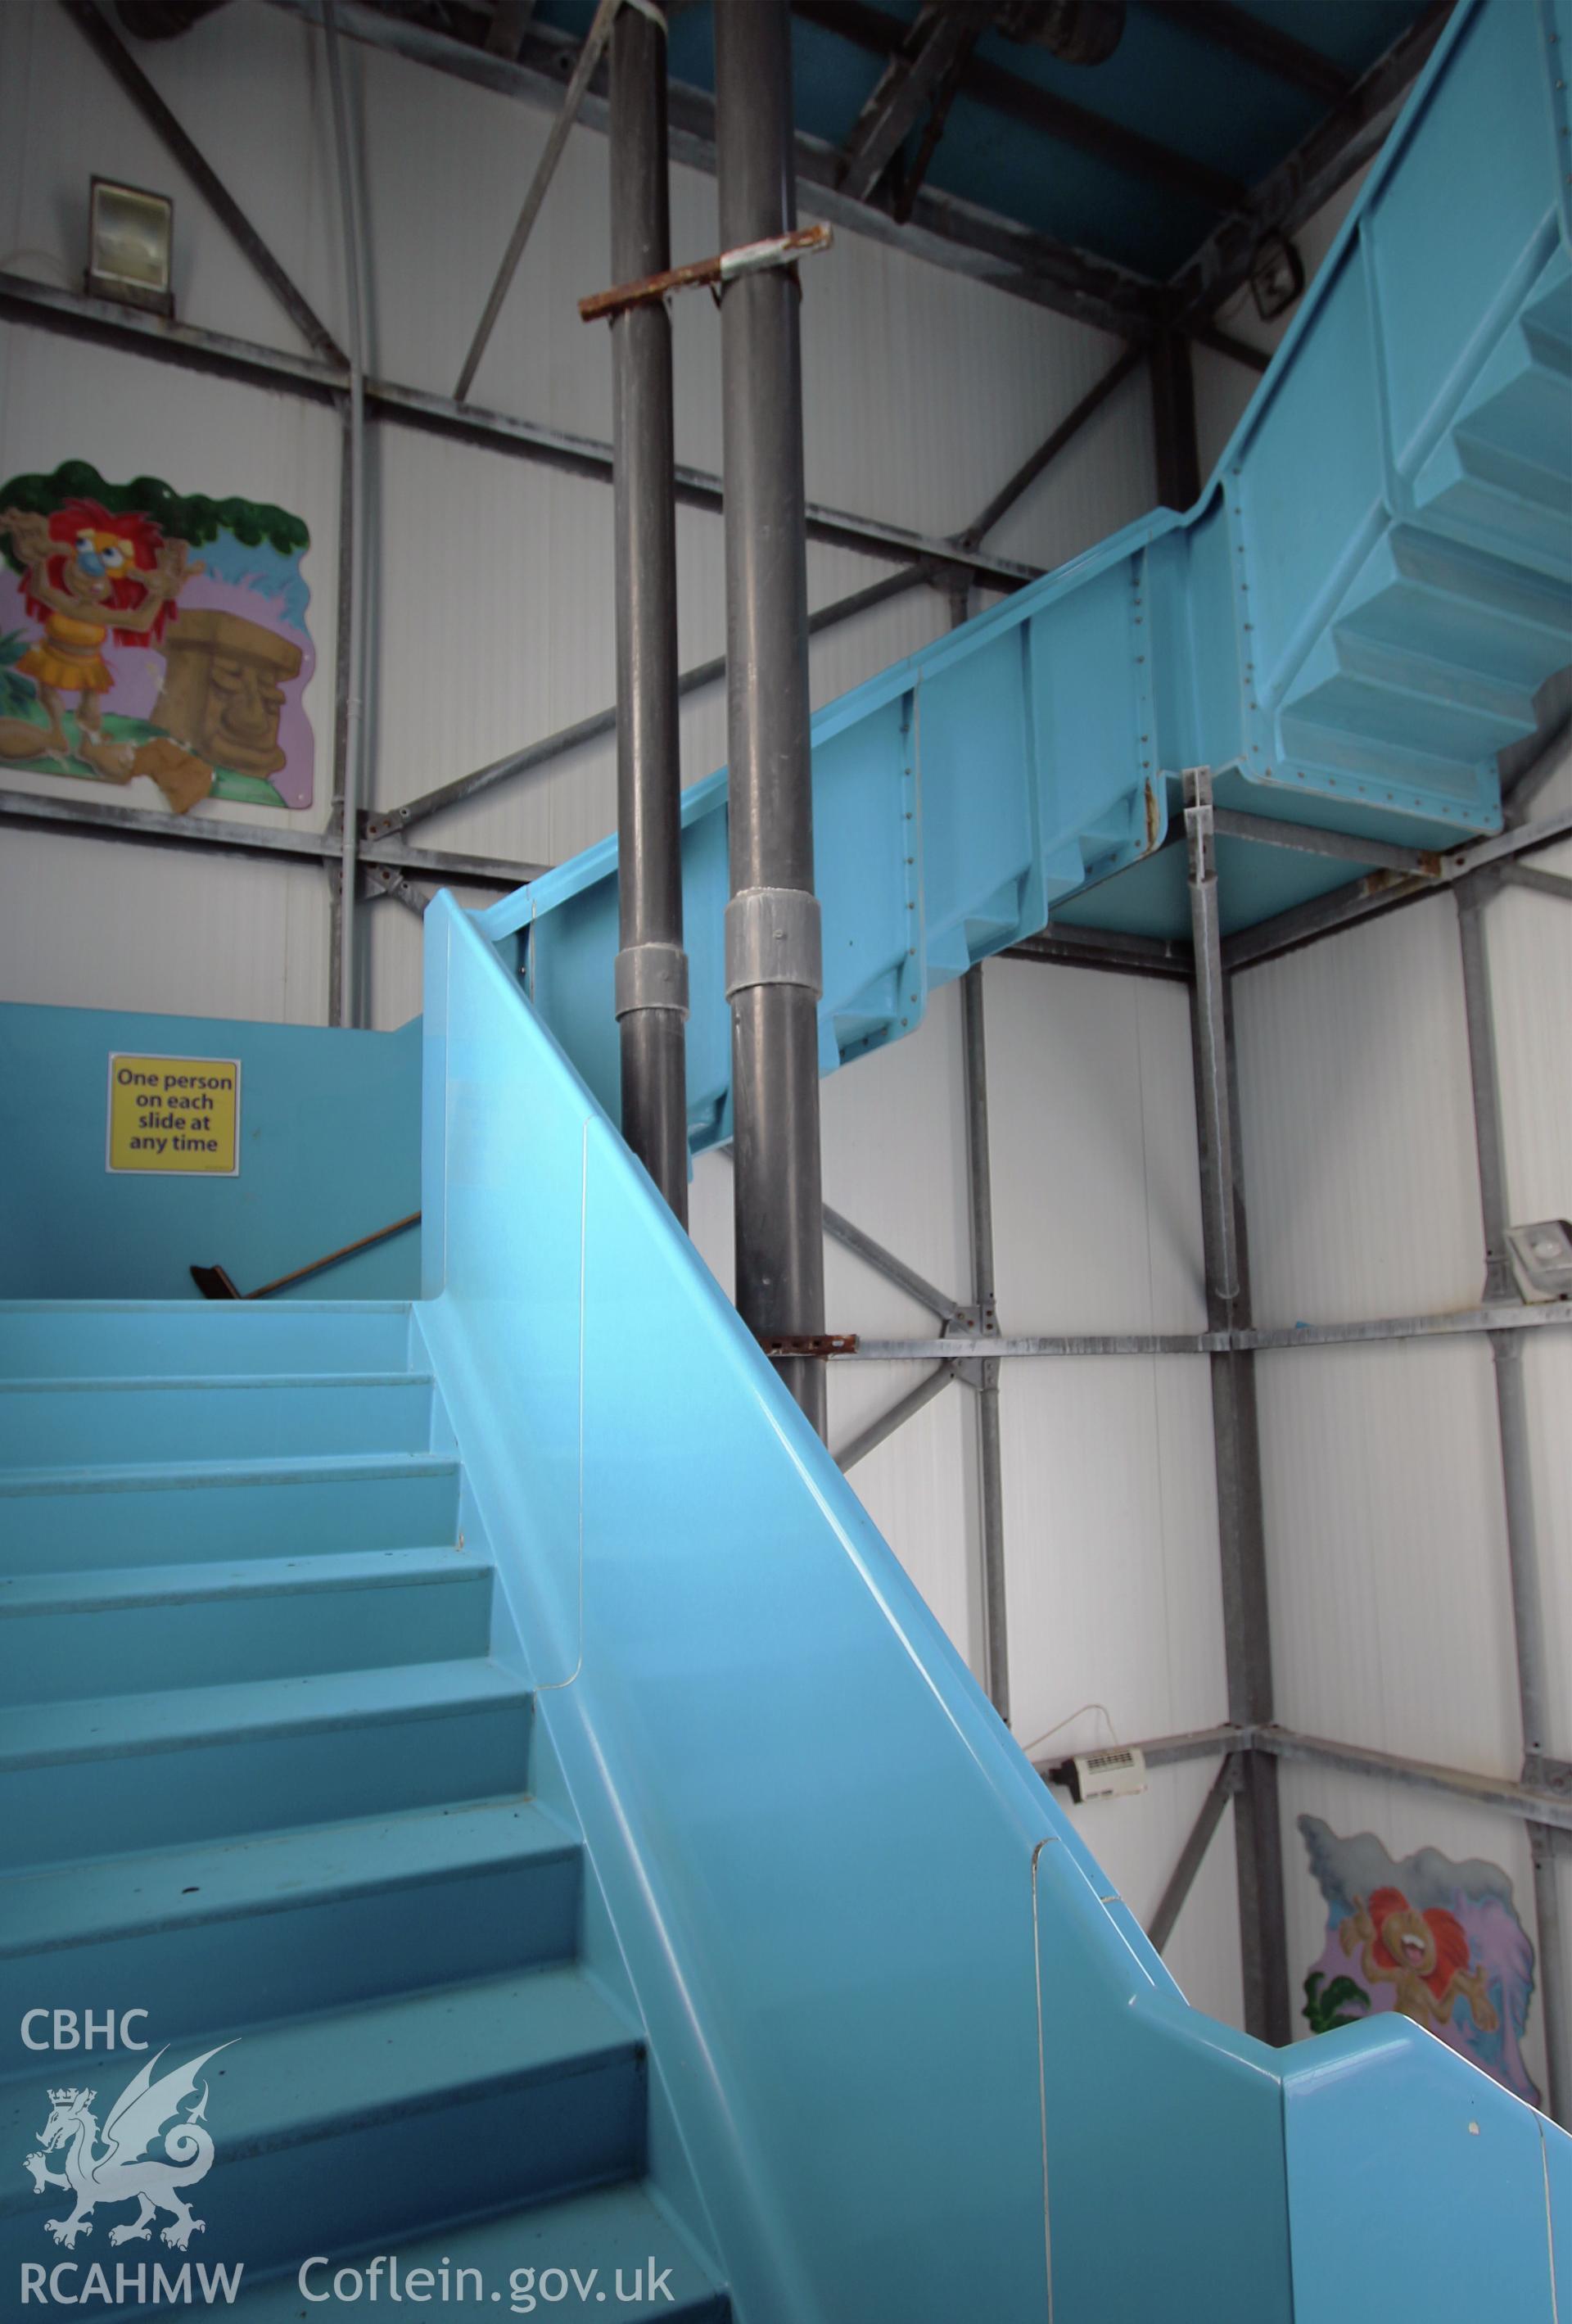 Slides at Rhyl Sun Centre, taken by Sue Fielding, 27th May 2016.